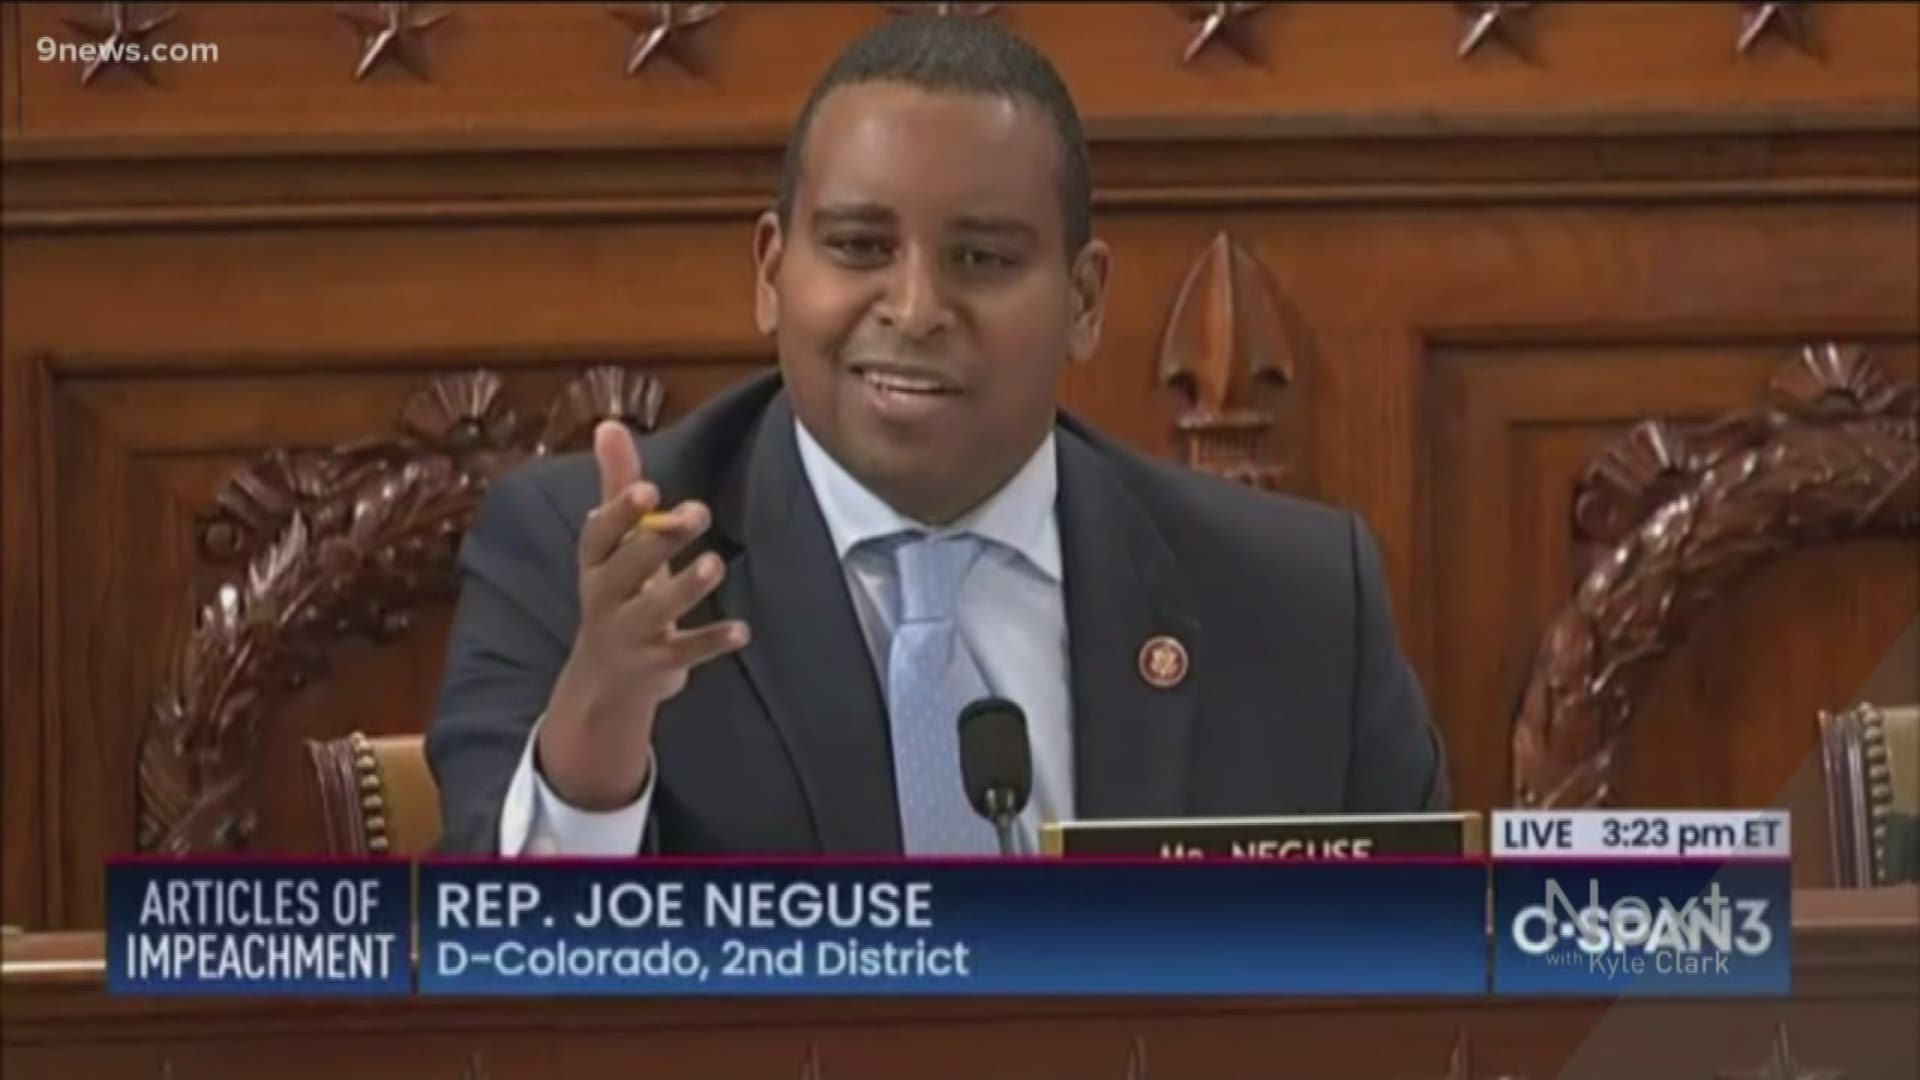 President Trump's impeachment hearing in the House Judiciary Committee continues to spotlight two Coloradans - Democrat Joe Neguse and Republican Ken Buck.